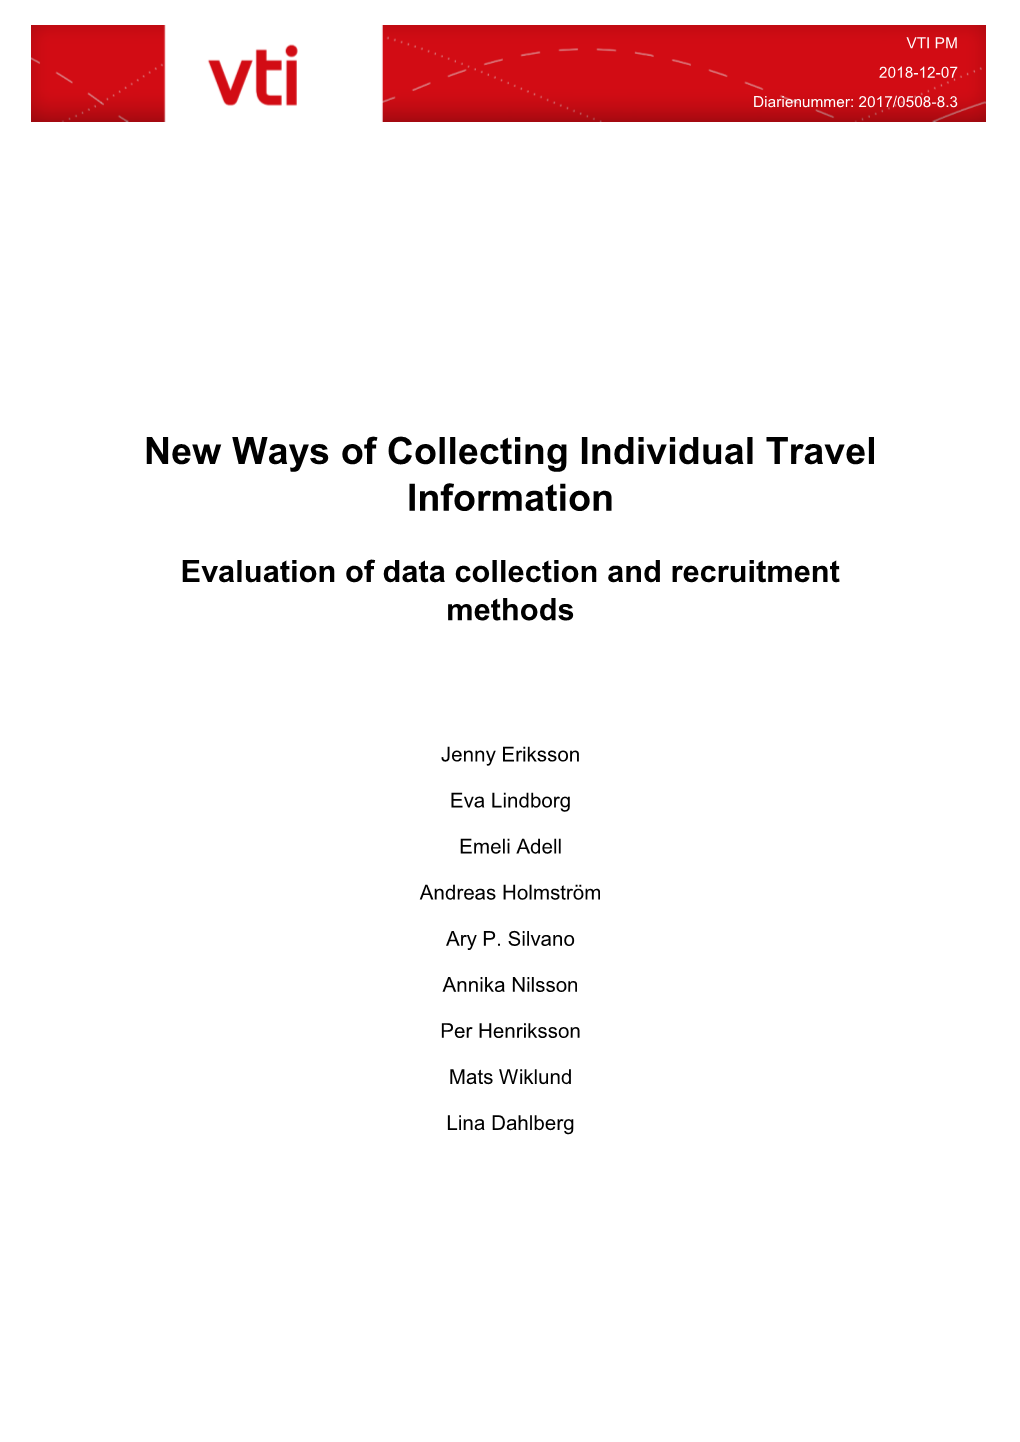 New Ways of Collecting Individual Travel Information